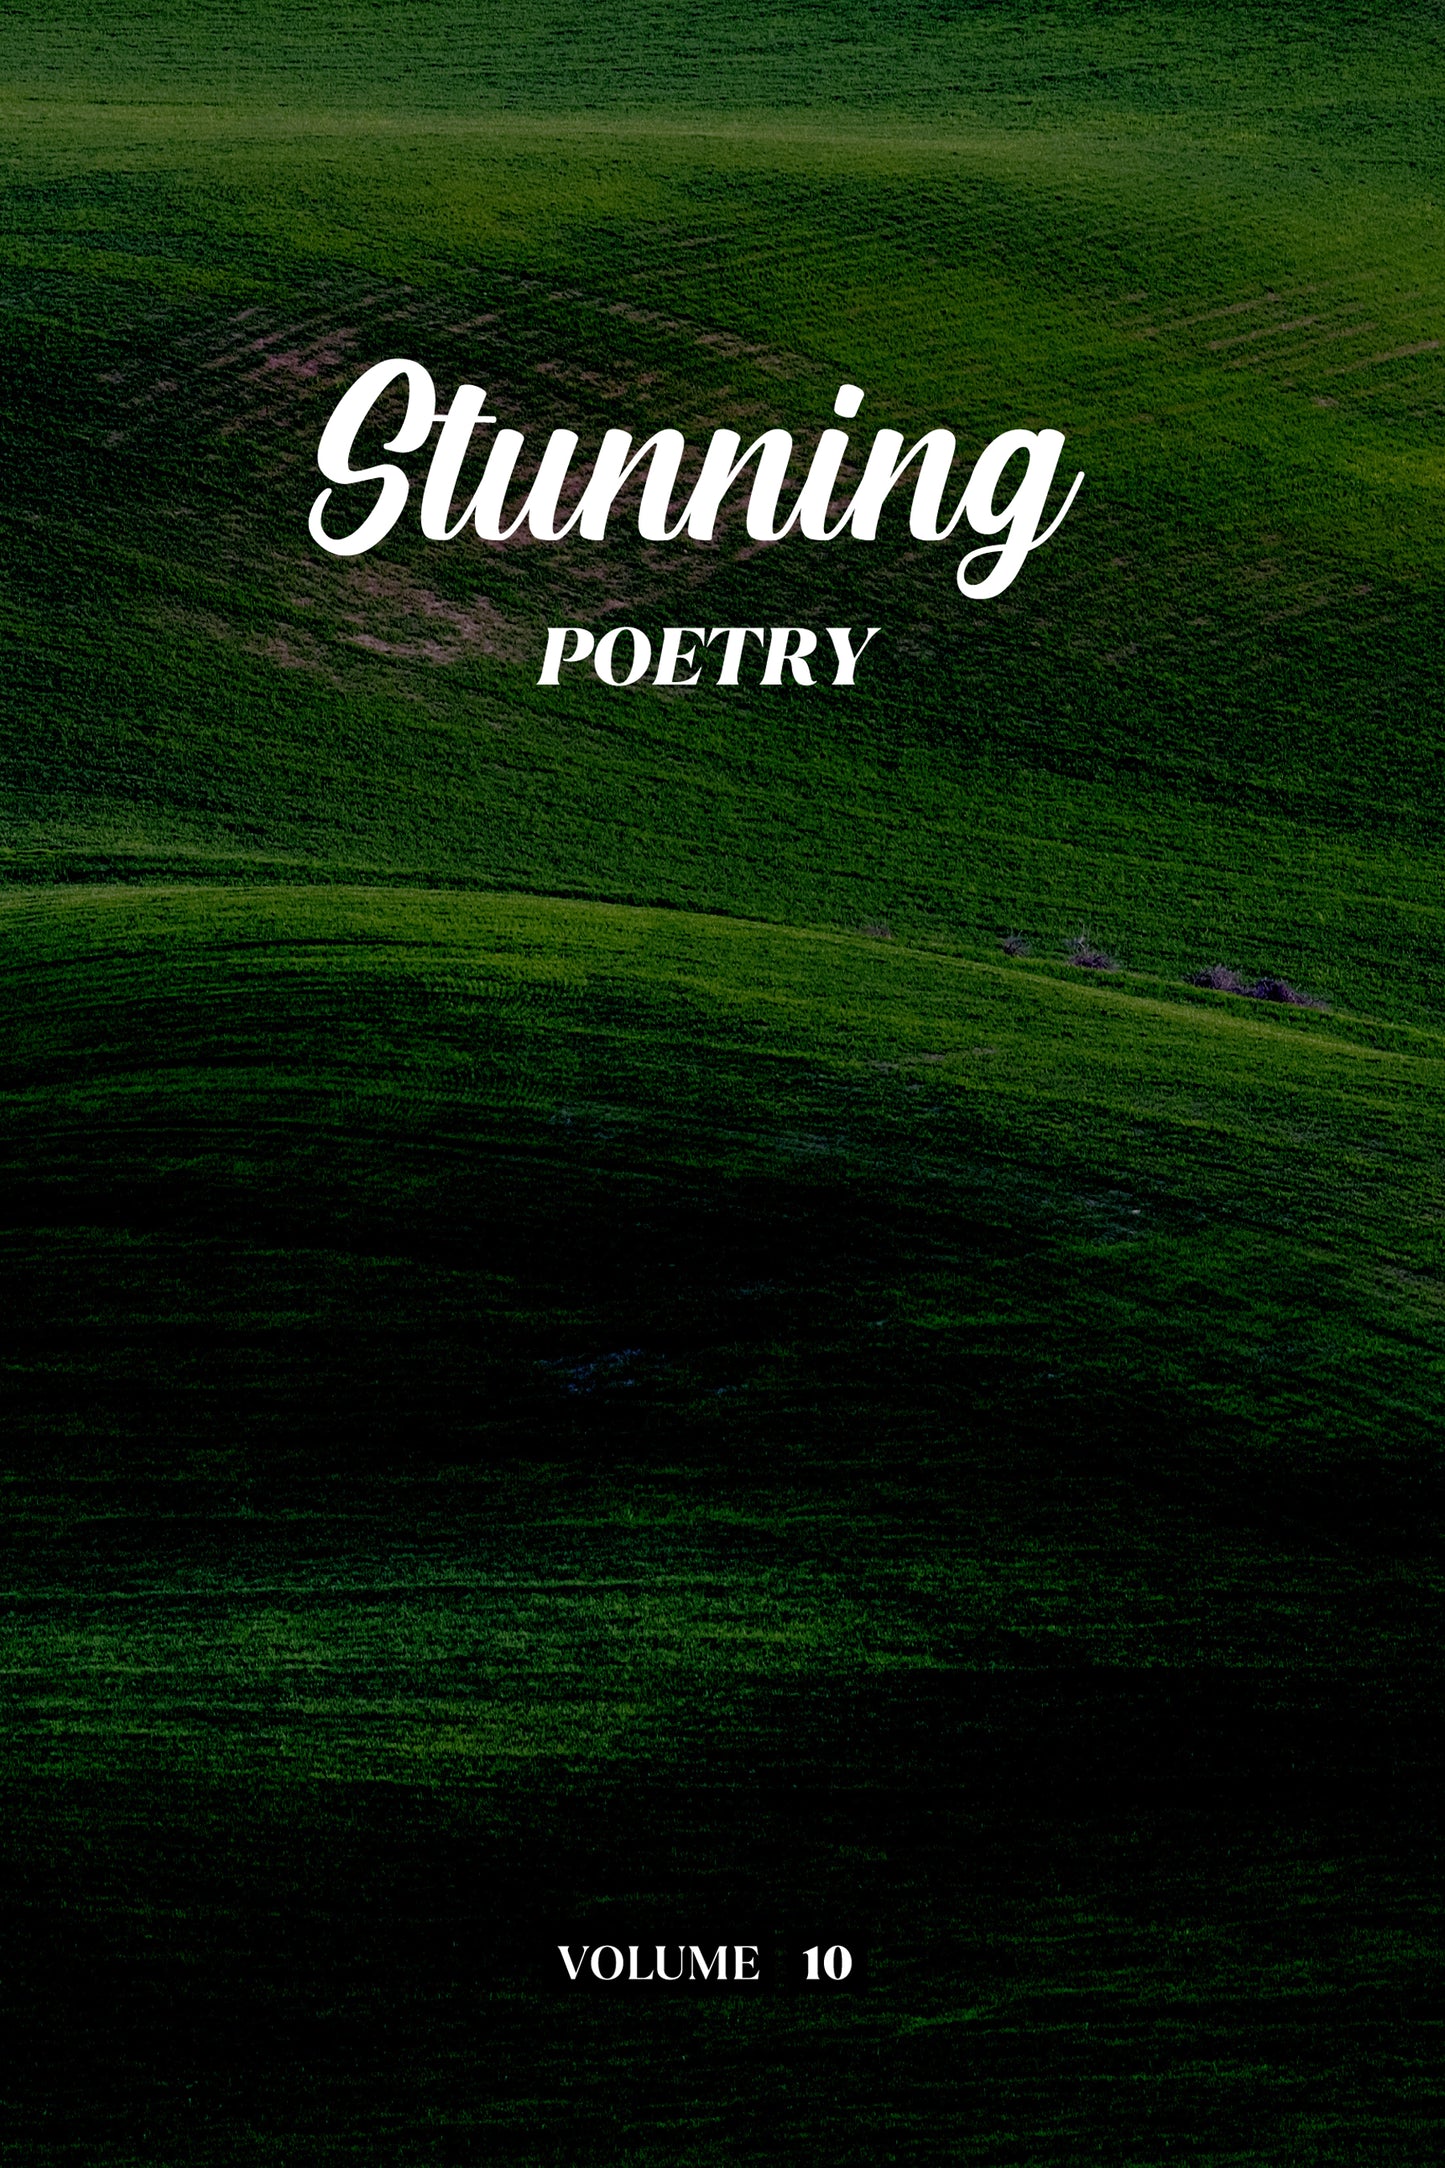 Stunning Poetry (Volume 10) - Physical Book